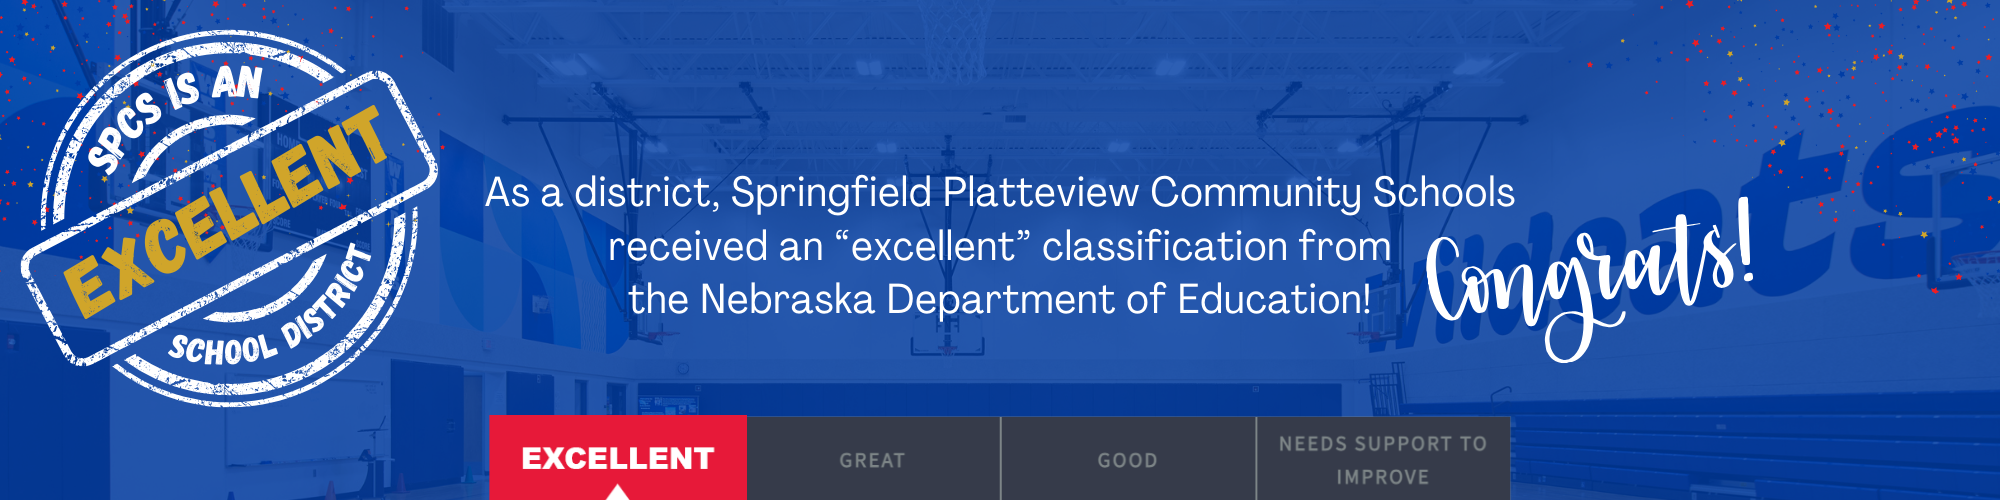 As a district, Springfield Platteview Community Schools received an 